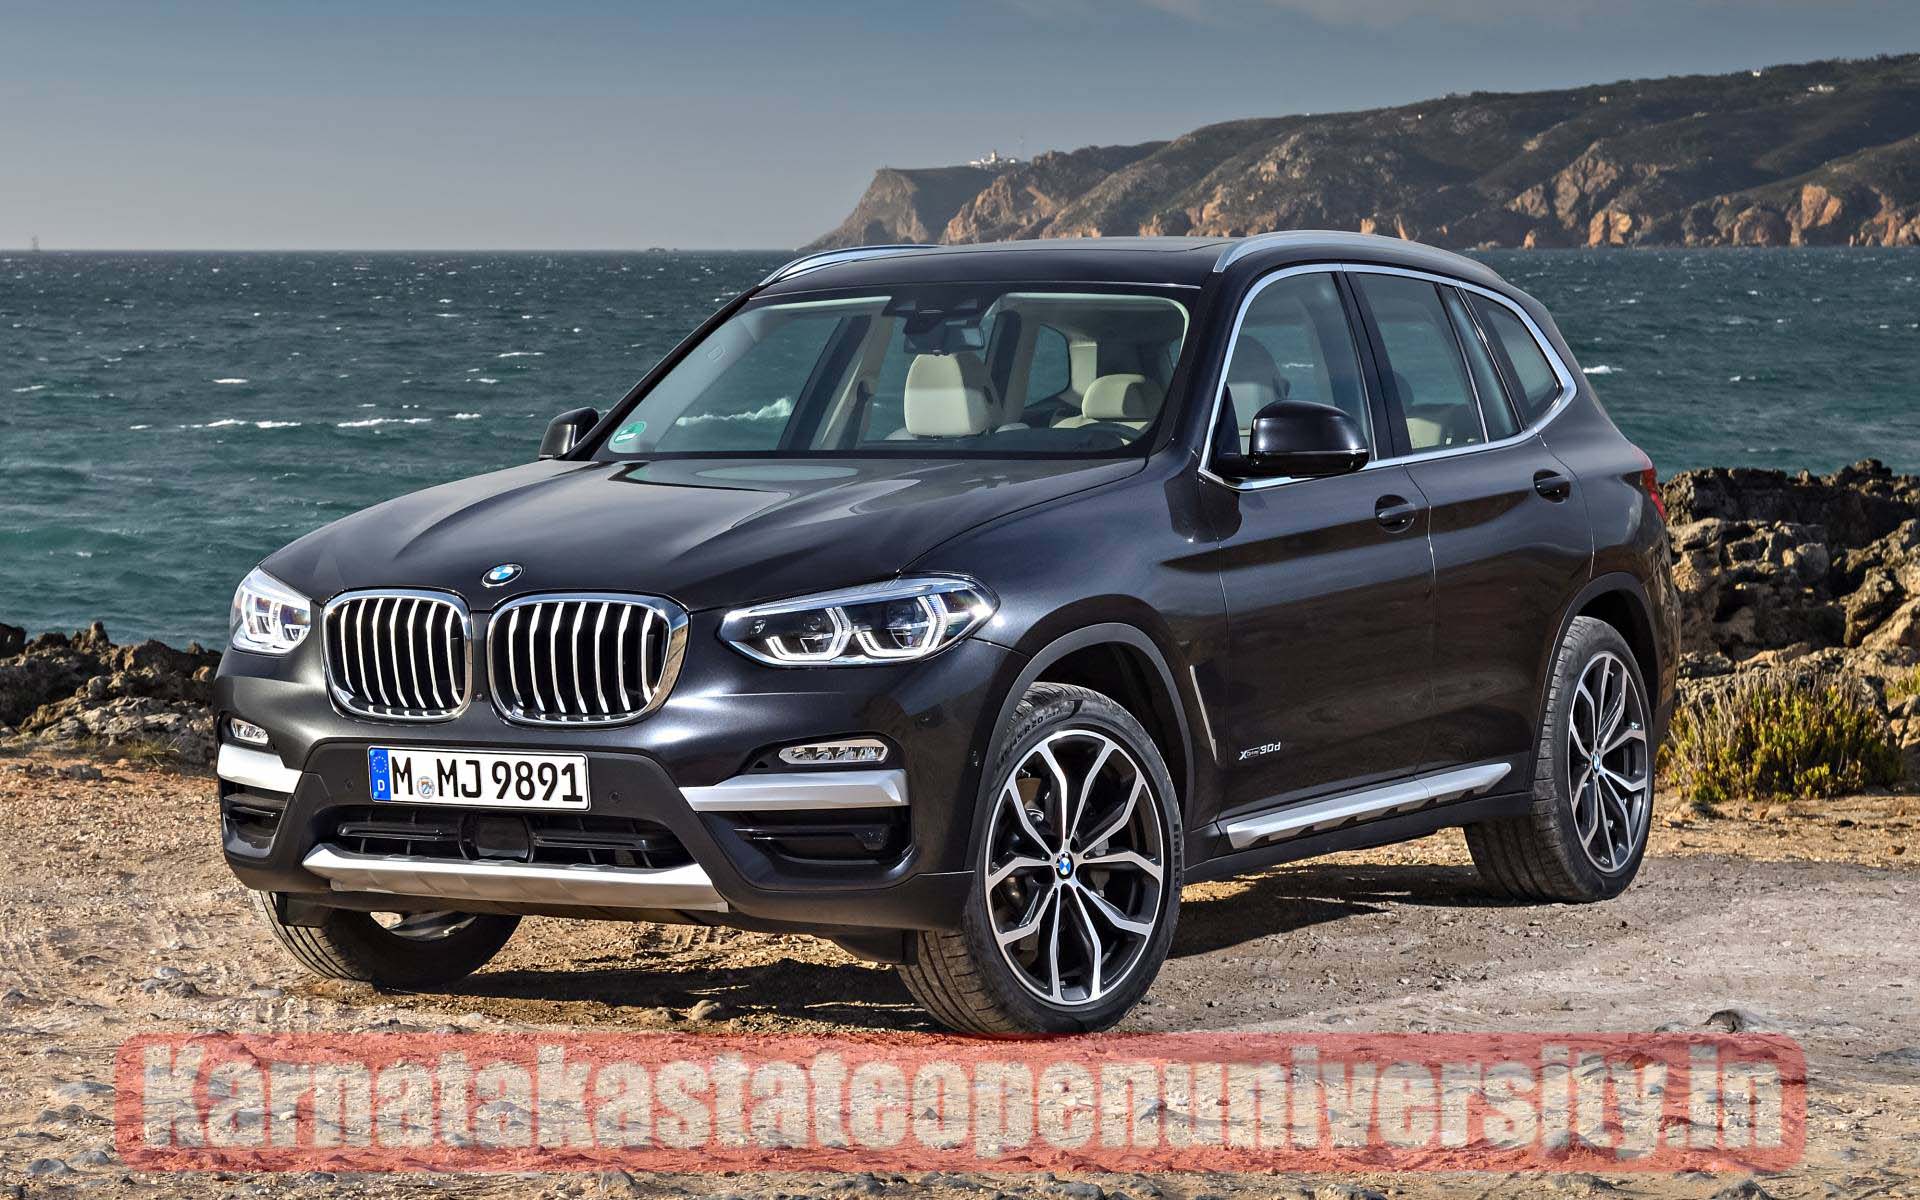 BMW X3 Price in India, Images, Review & Colors